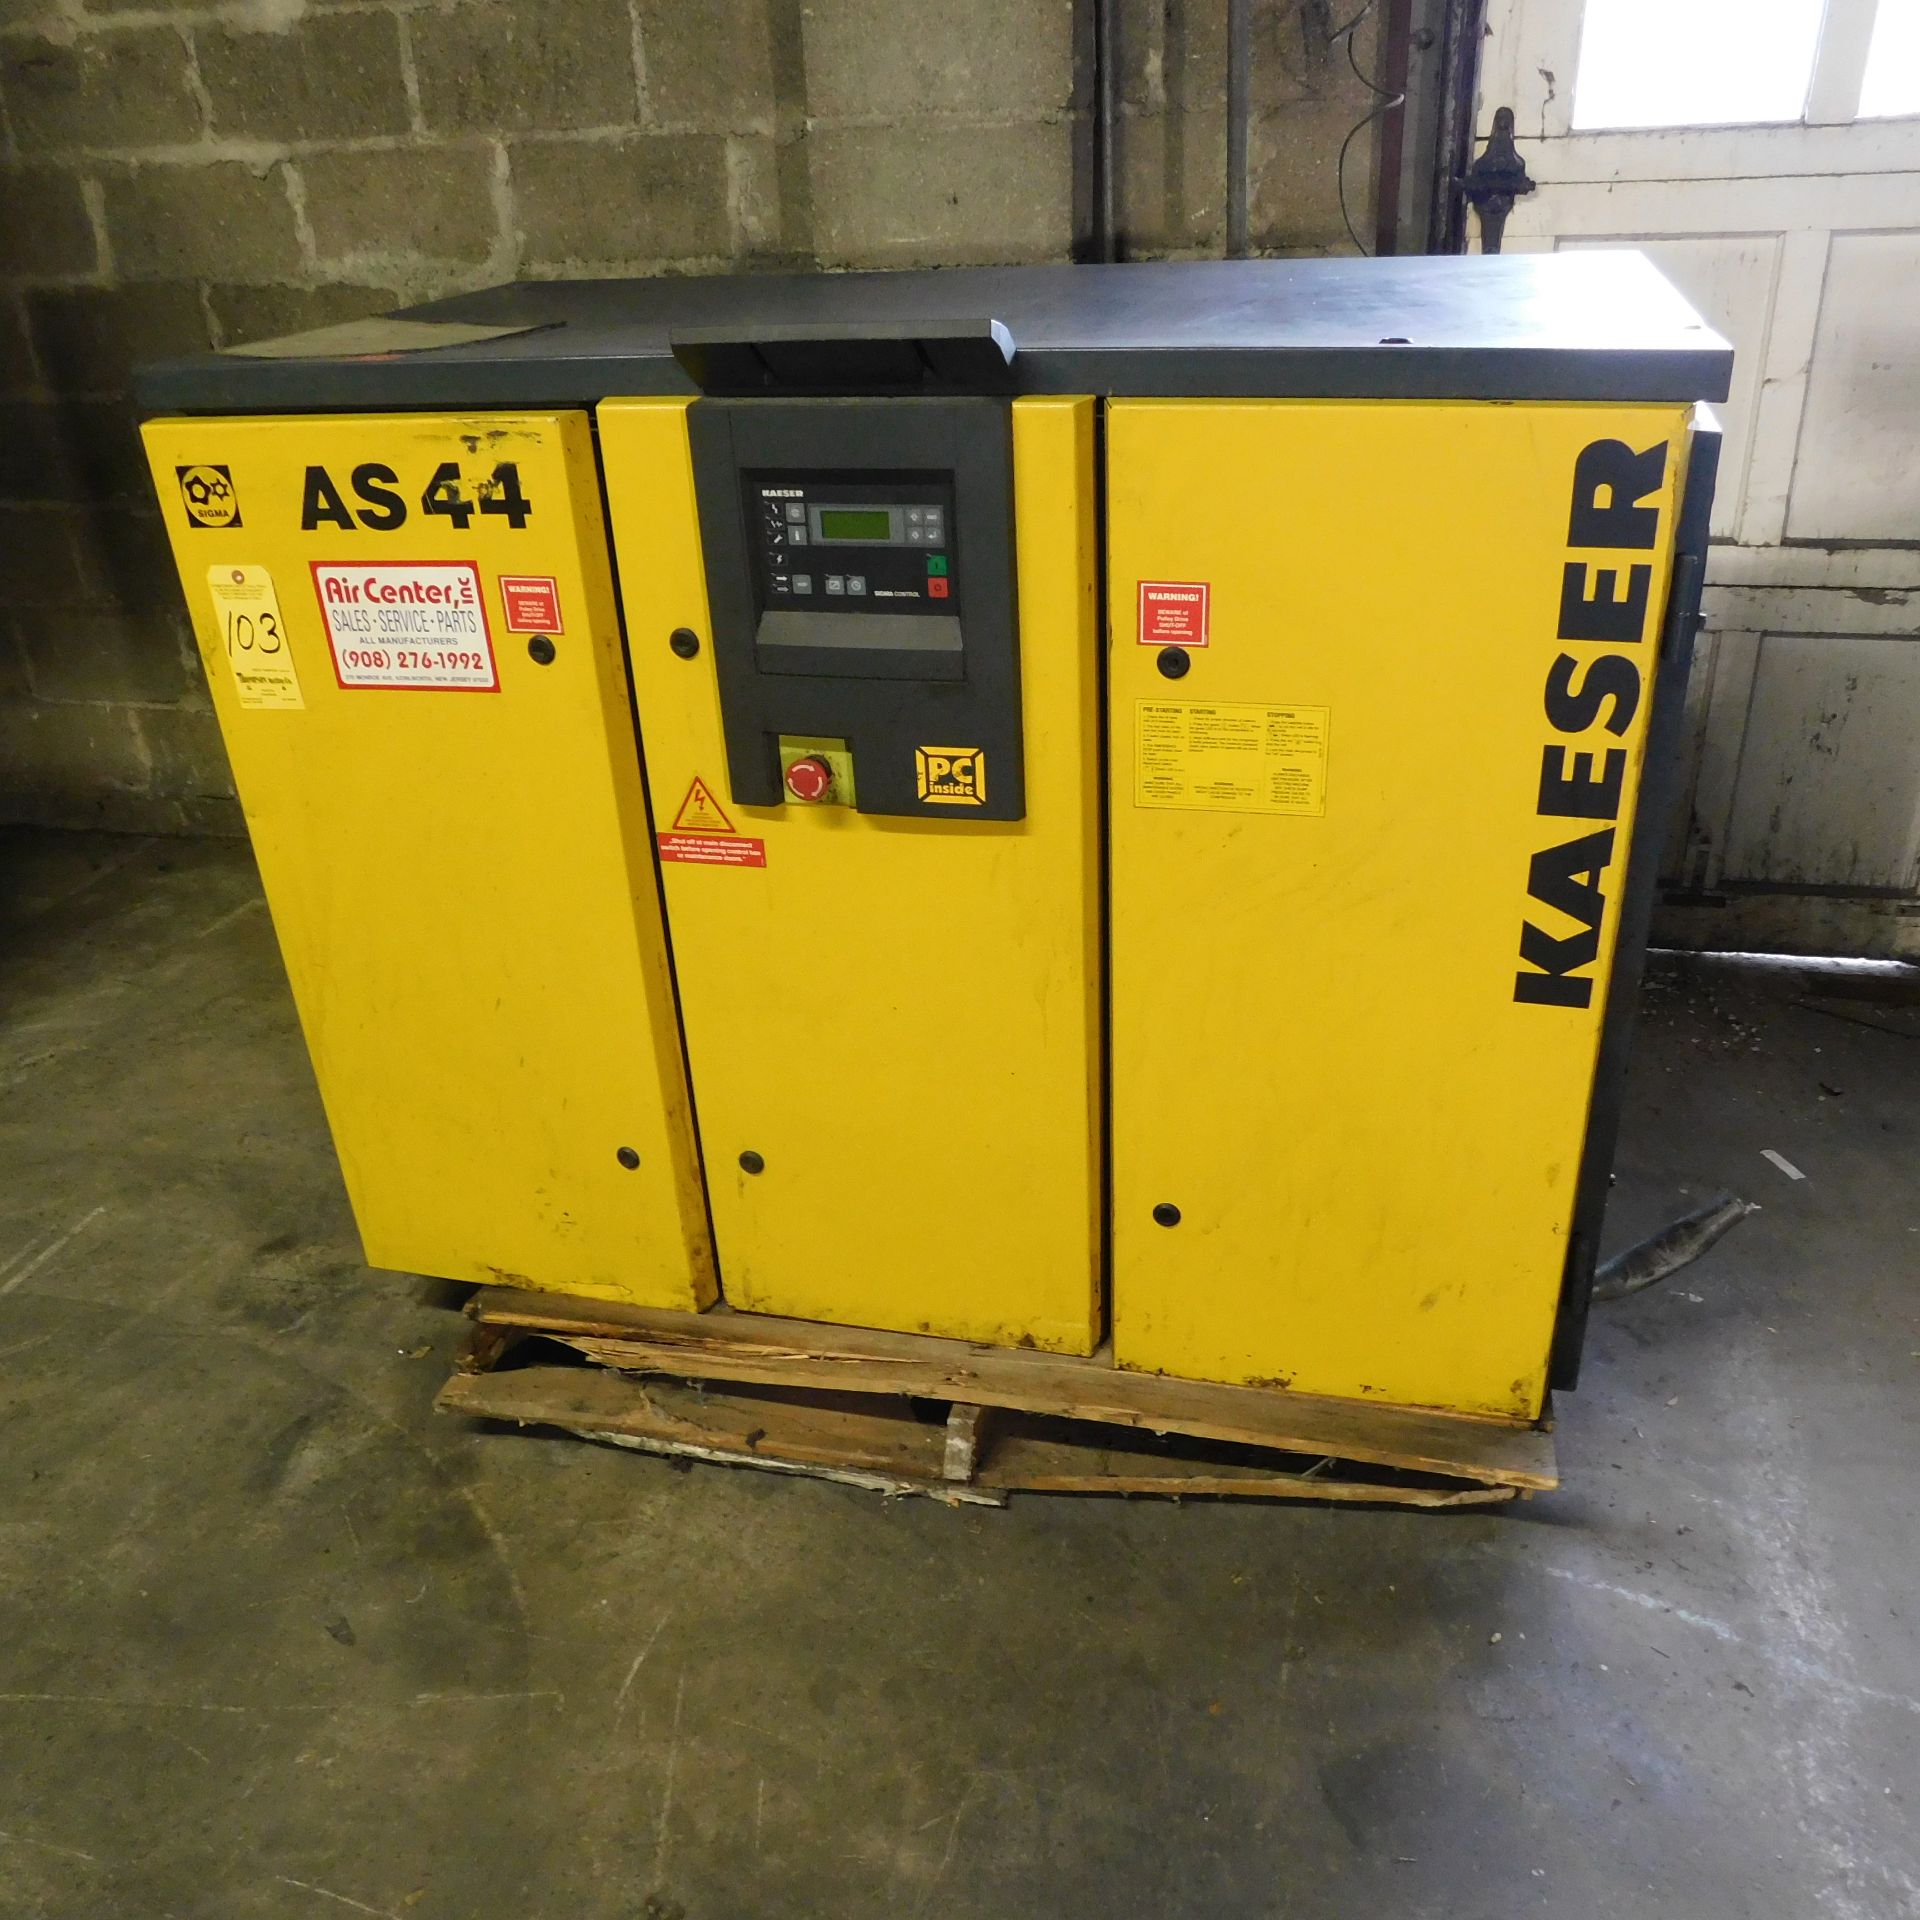 Kaeser Sigma Model AS44 Rotary Screw Air Compressor, Not in Service